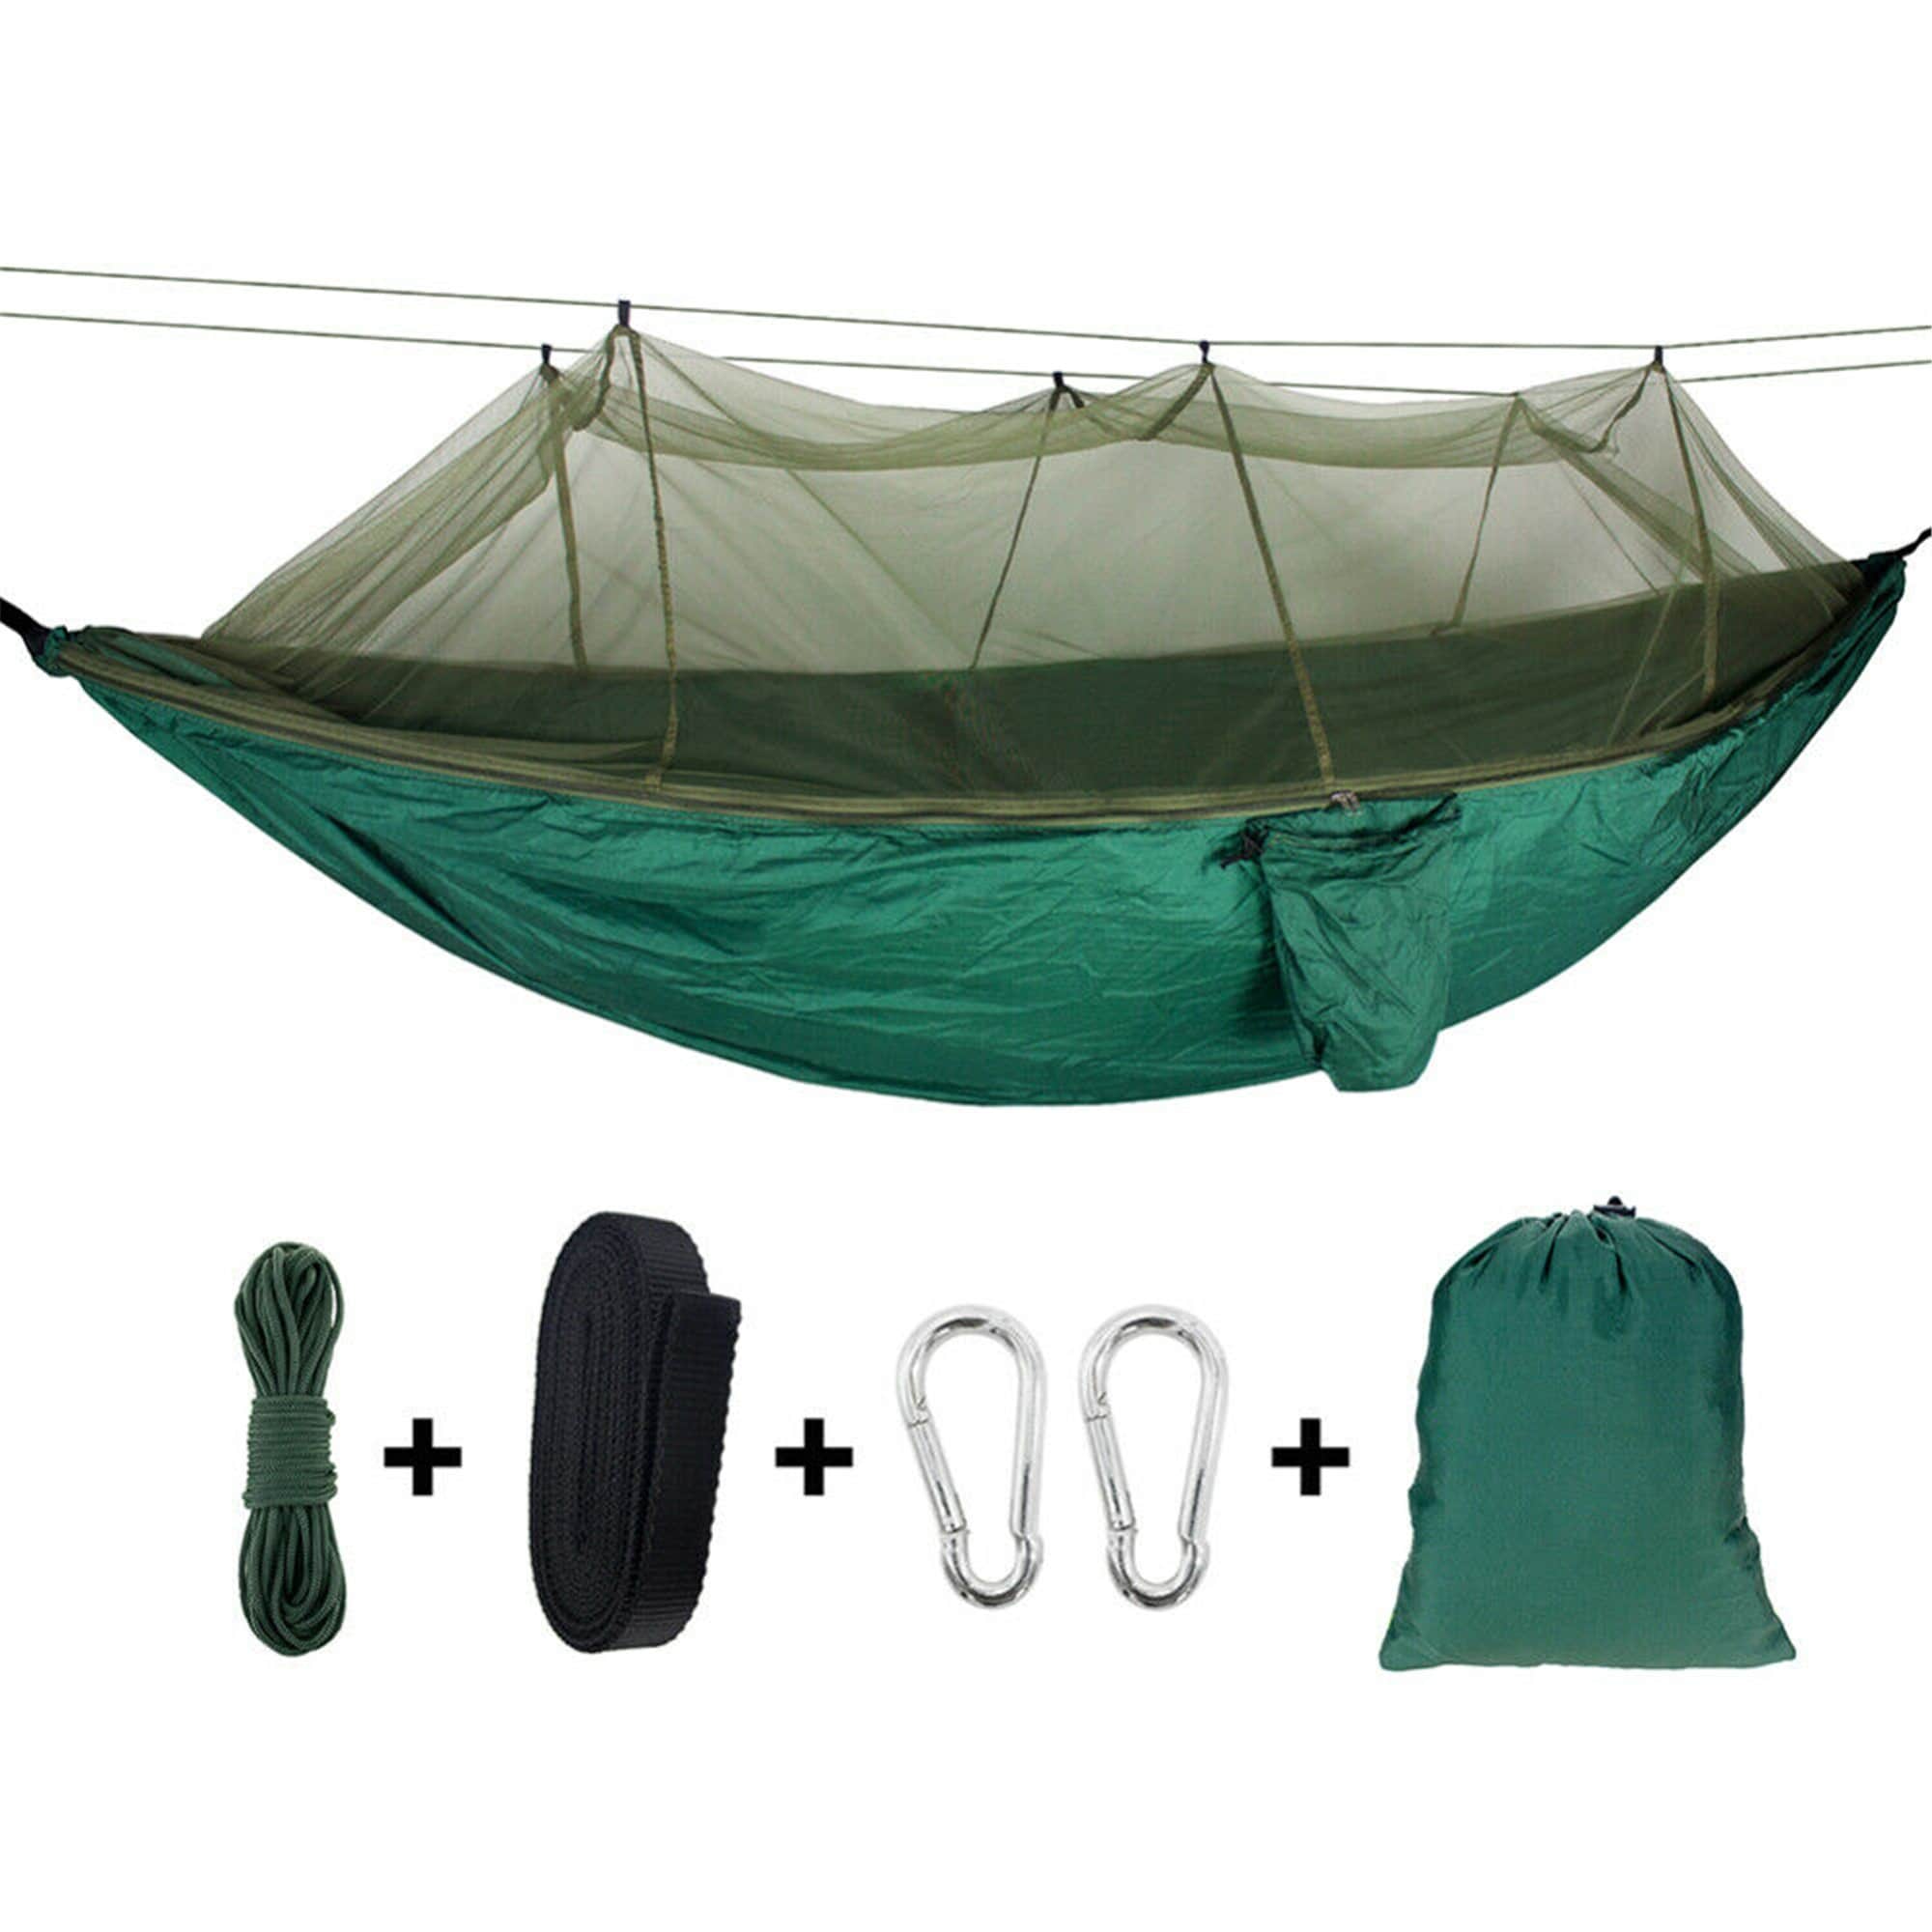 Double Person Travel Outdoor Camping Tent Hanging Hammock Bed With Mosquito Net 